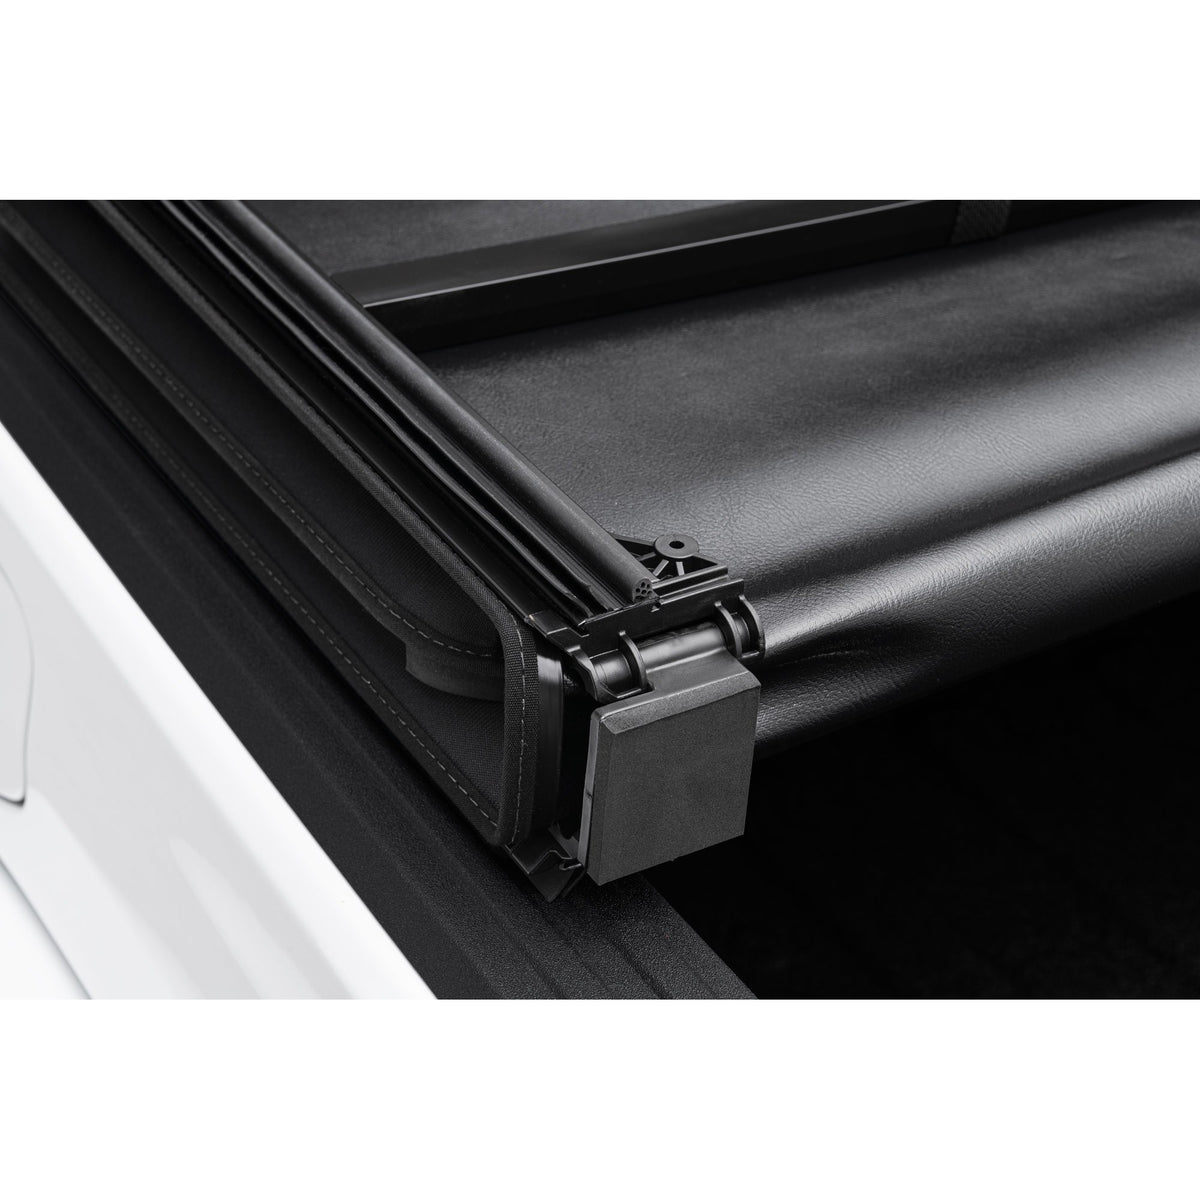 Rugged Ridge 13550.21 Armis SOFT Folding Bed Cover for 2020 on Jeep Gladiator JT